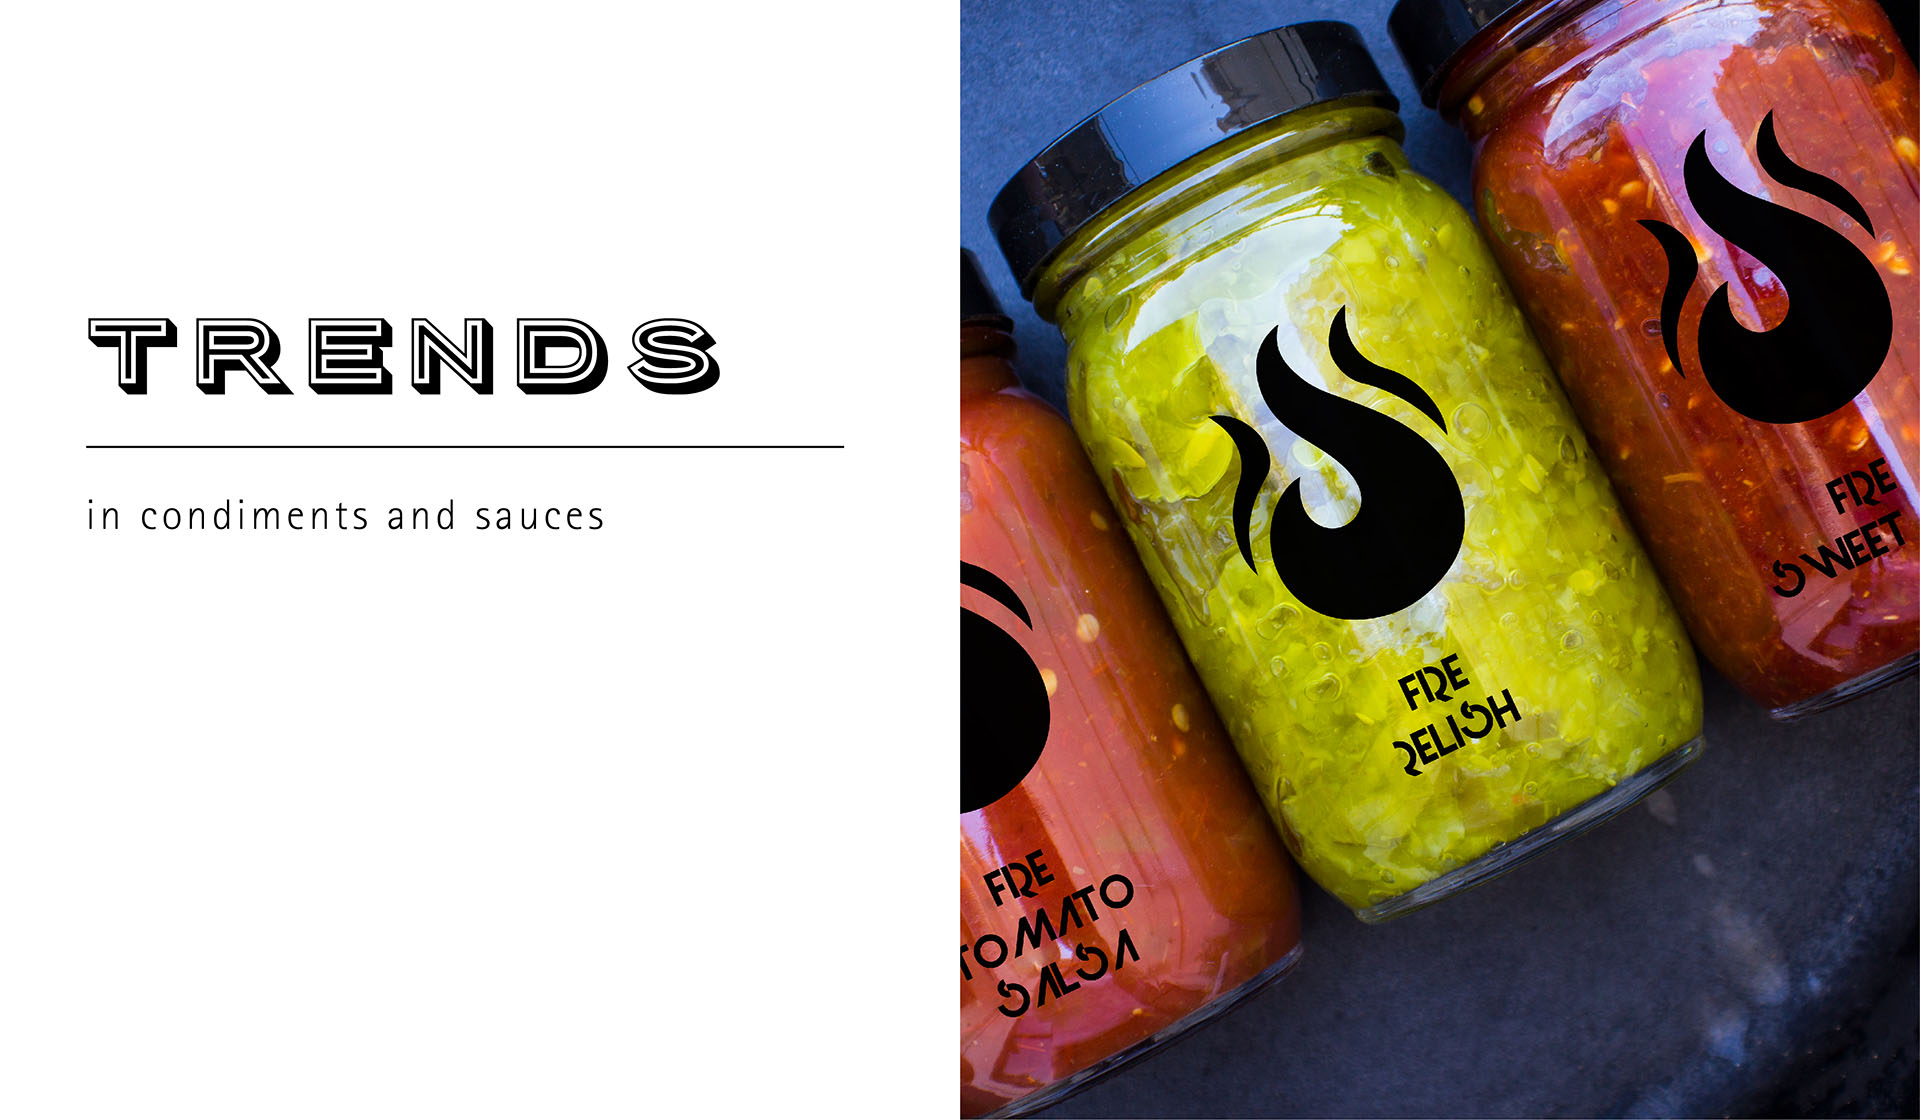 Trends in Condiments and Sauces